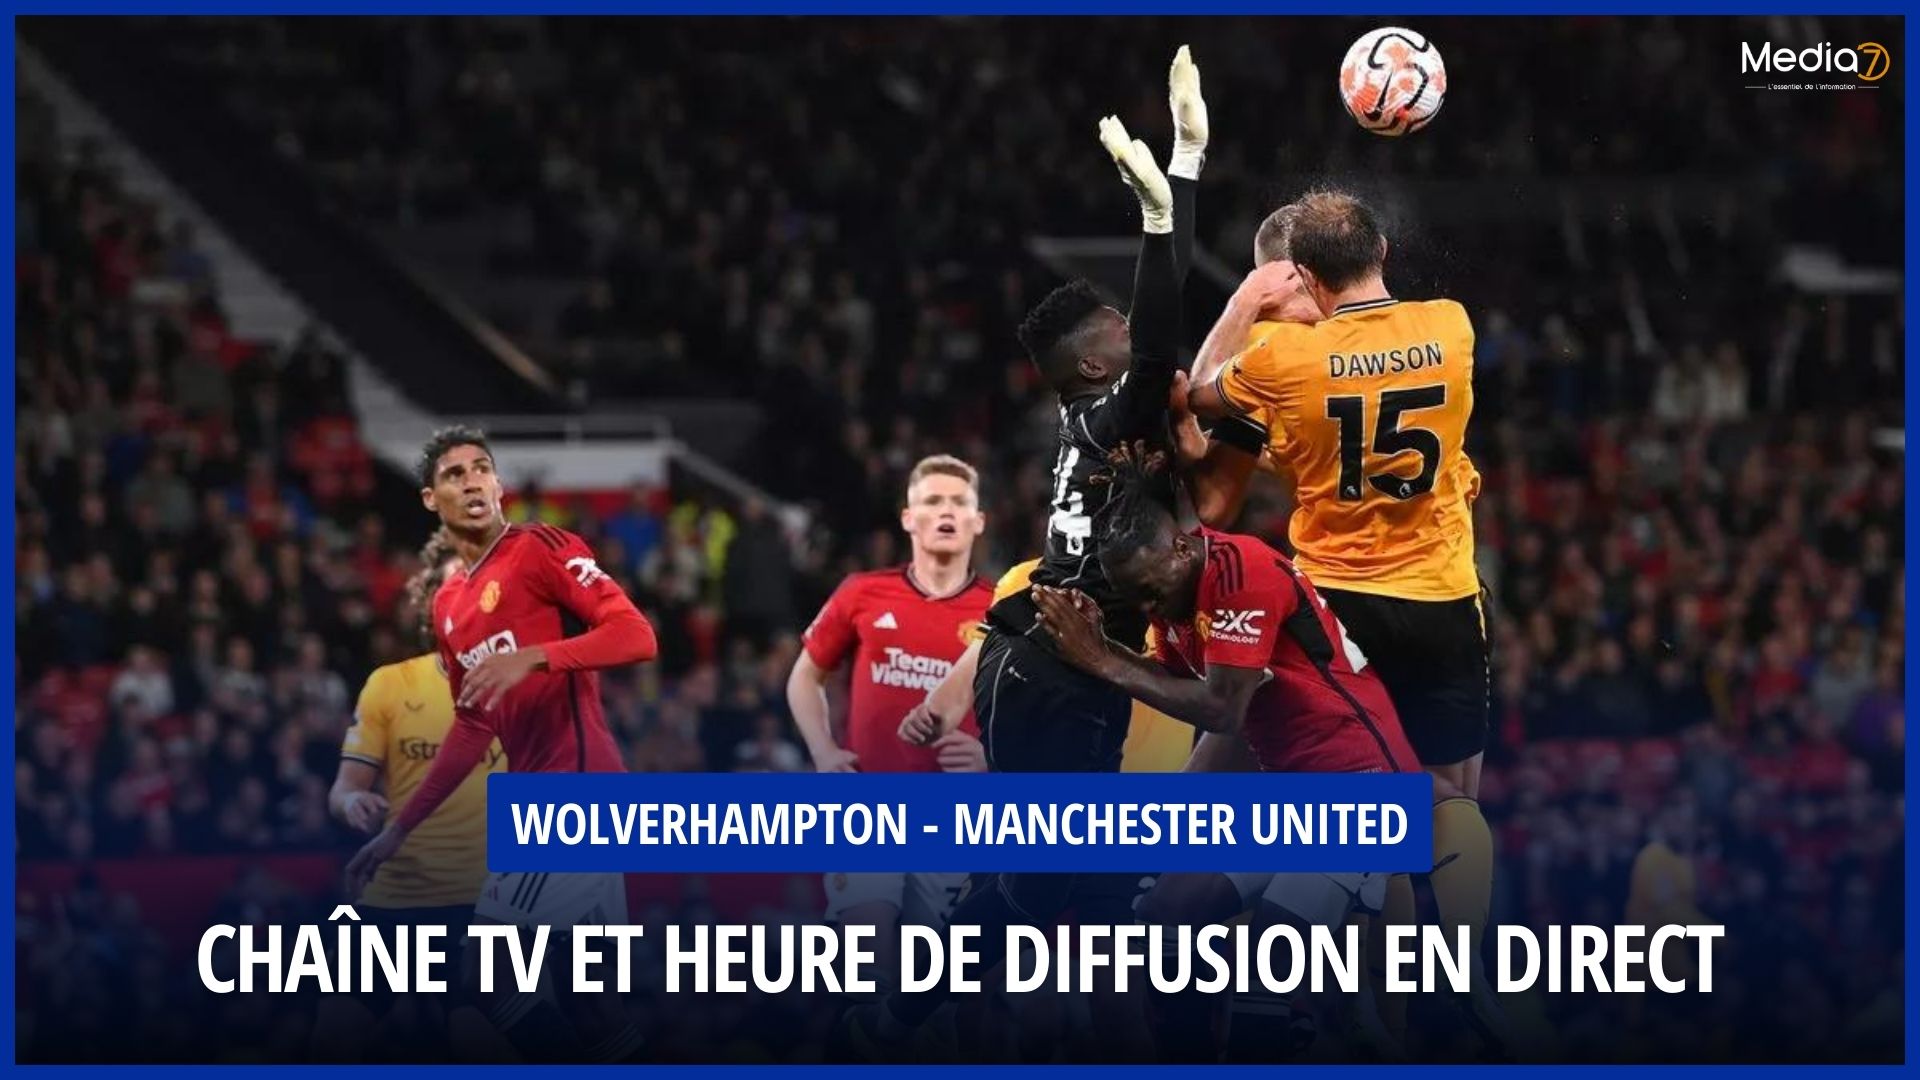 Wolverhampton - Manchester United live: TV channel and broadcast time - Media7